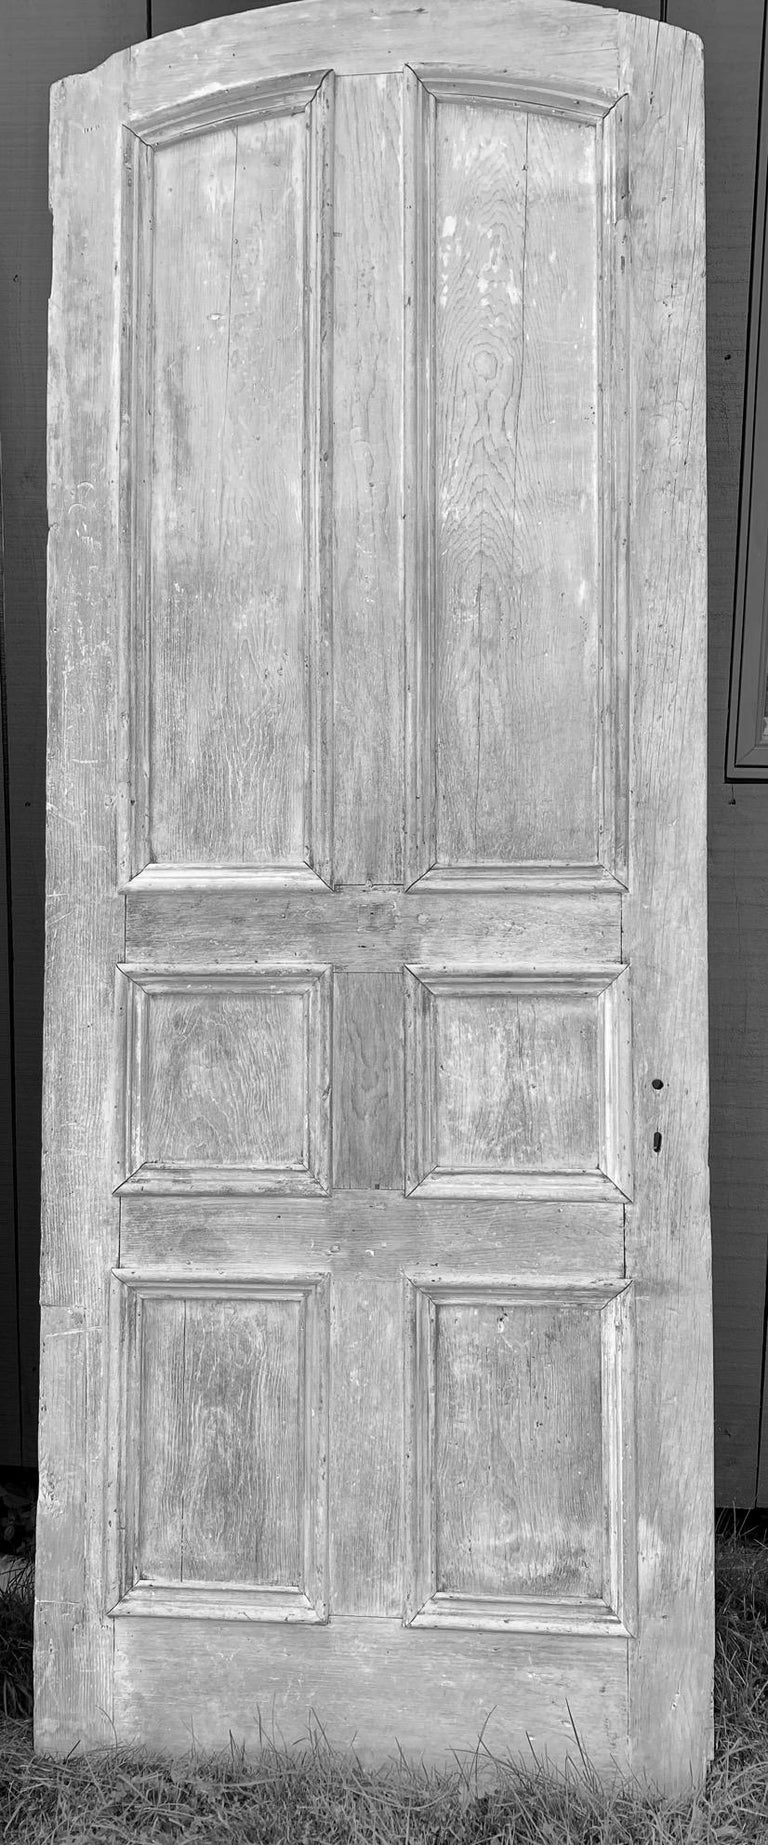 Three very large monumental over size rustic antique architectural paneled doors with oval top that will add character and style to any house. The doors are suitable for many decor including country classic, Swedish Gustavian or French